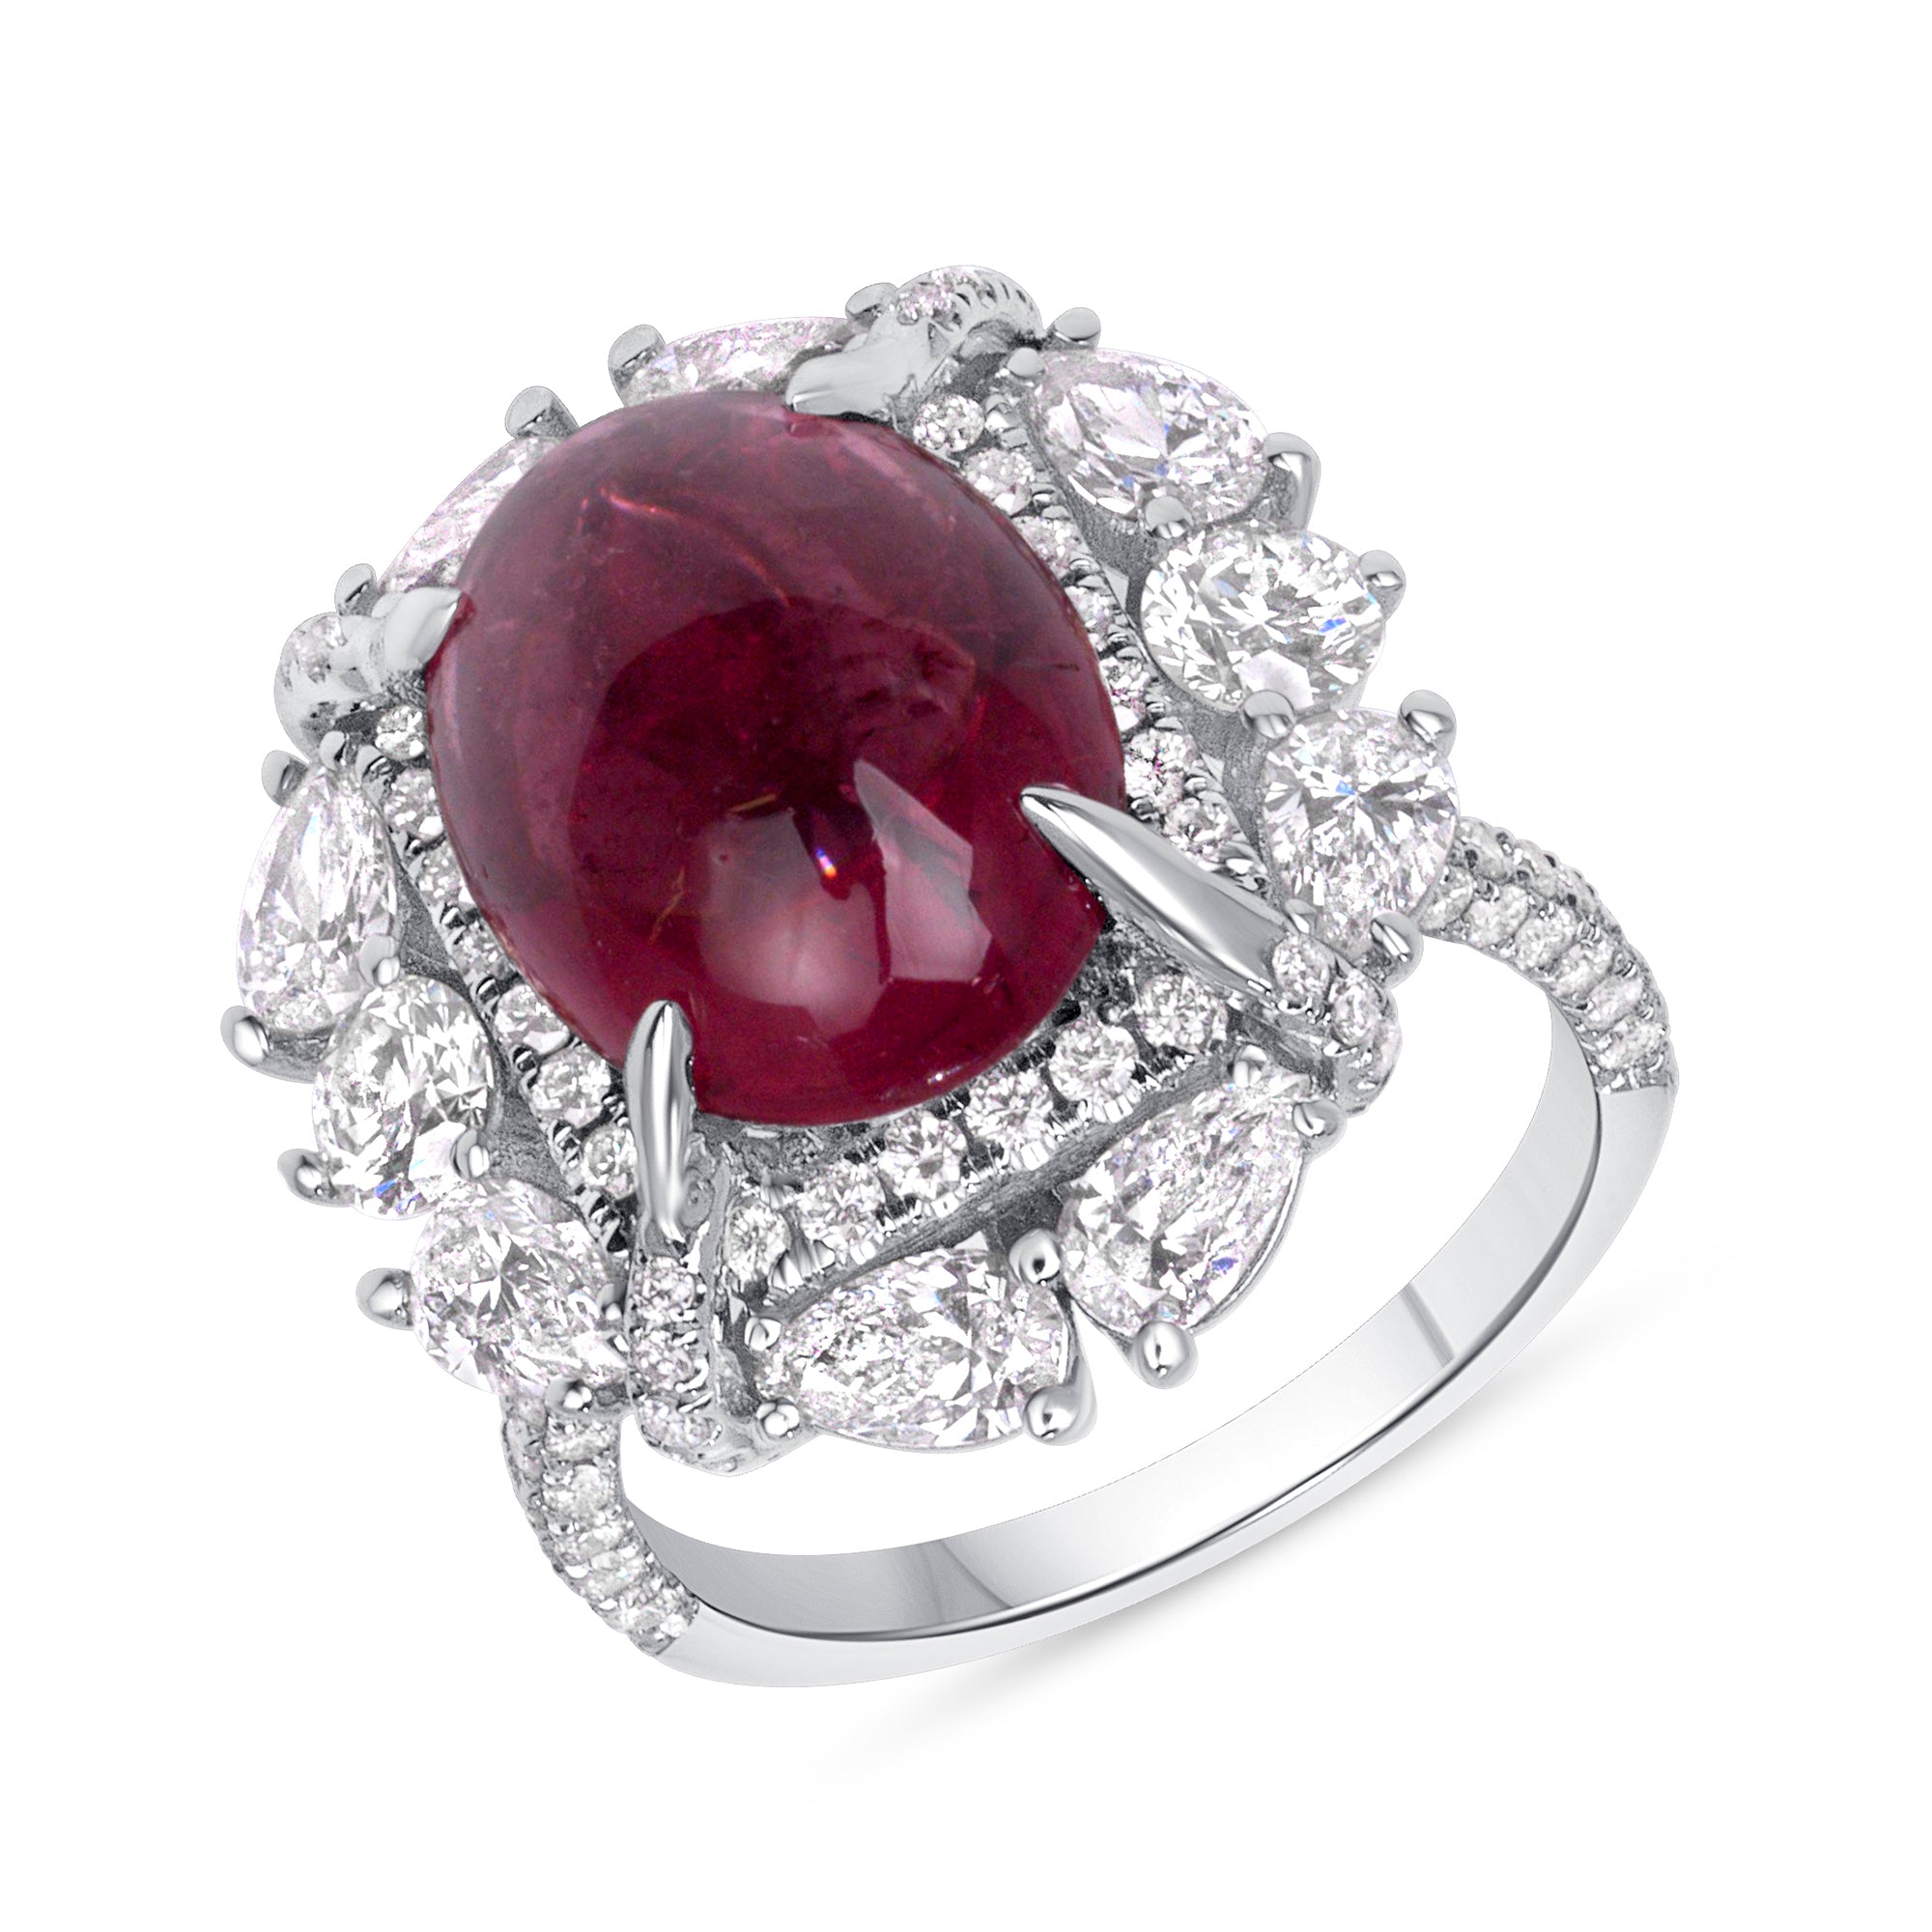 Oval Tourmaline and Diamond Ring in 14K White Gold